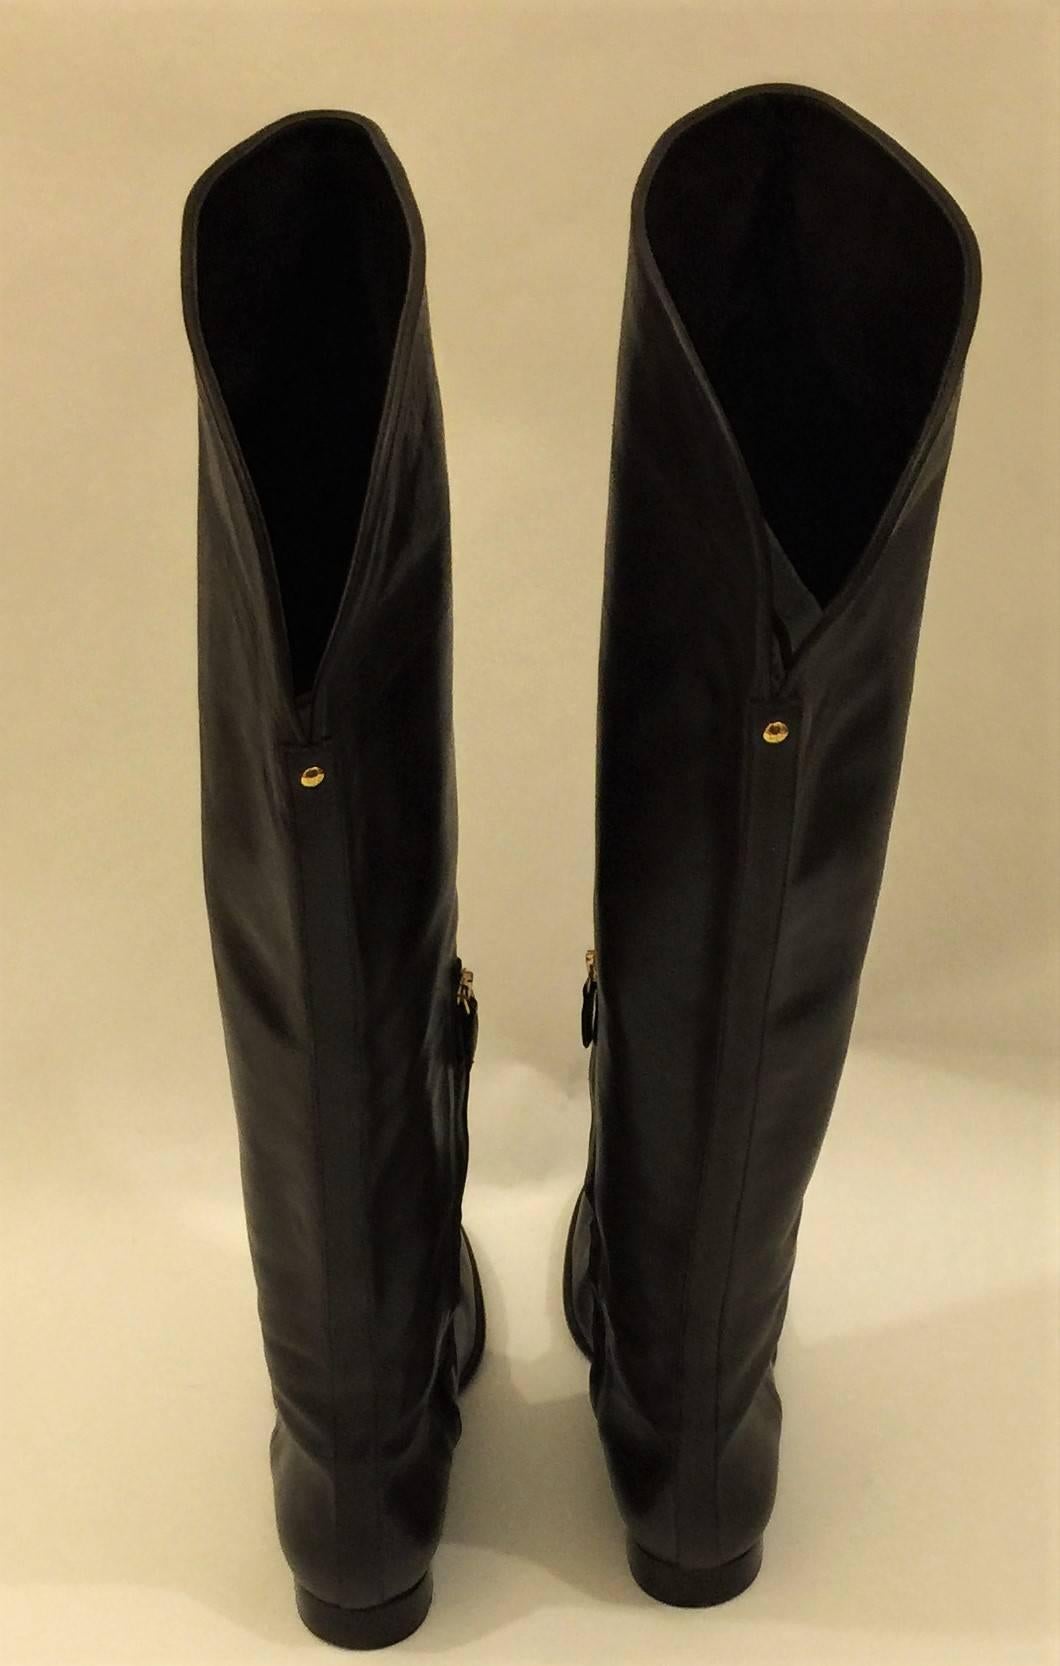 Black Loro Piana Iconic hand-made 100% Leather Knee High with turn-back Cuff Boots.  